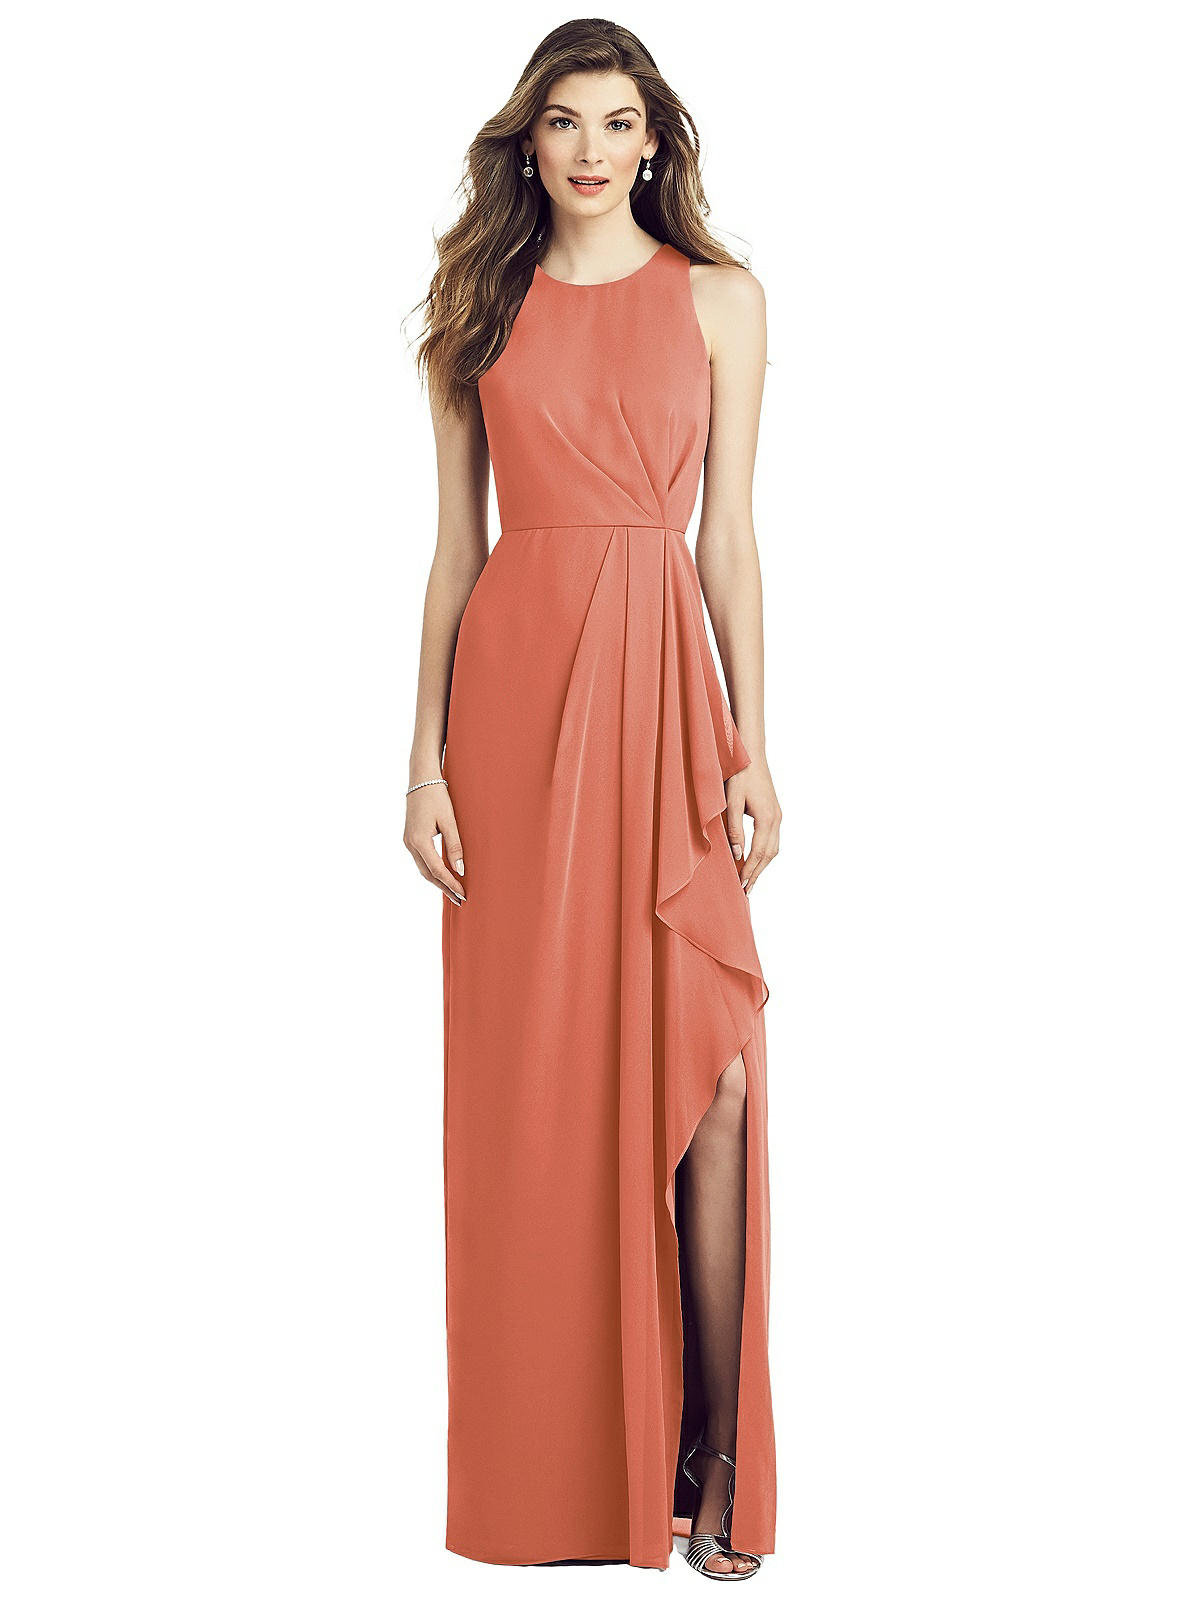 Dessy Collection Sleeveless Draped Chiffon Maxi Dress Front Slit Floral -  Dresses